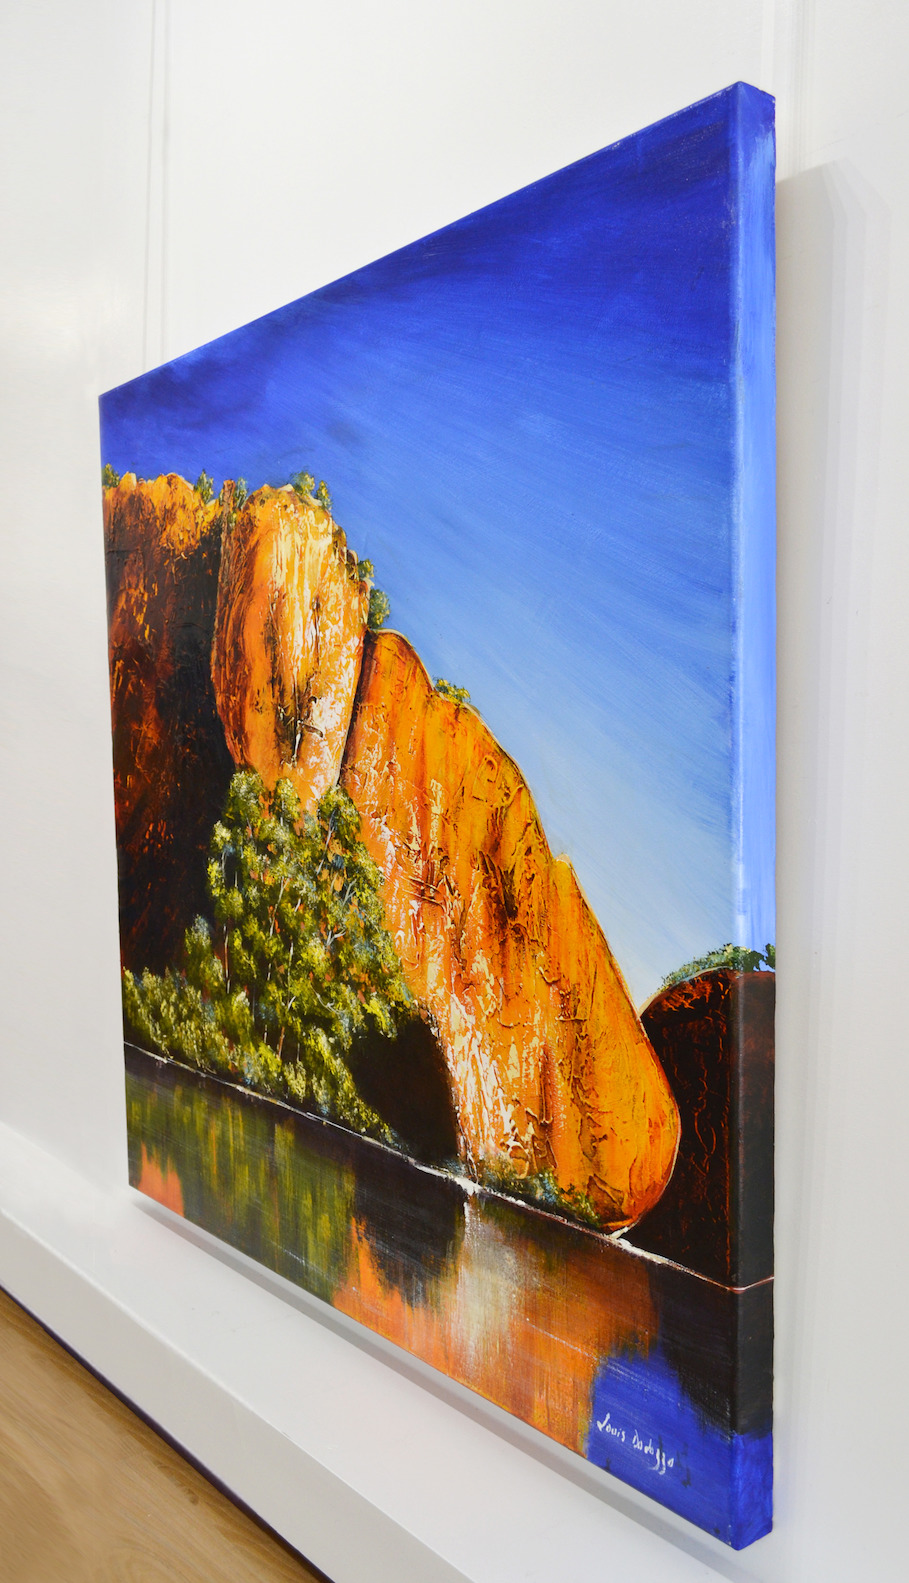 Side View Of Landscape Painting "Afternoon Reflection Ellis Creek" By Louis Dalozzo